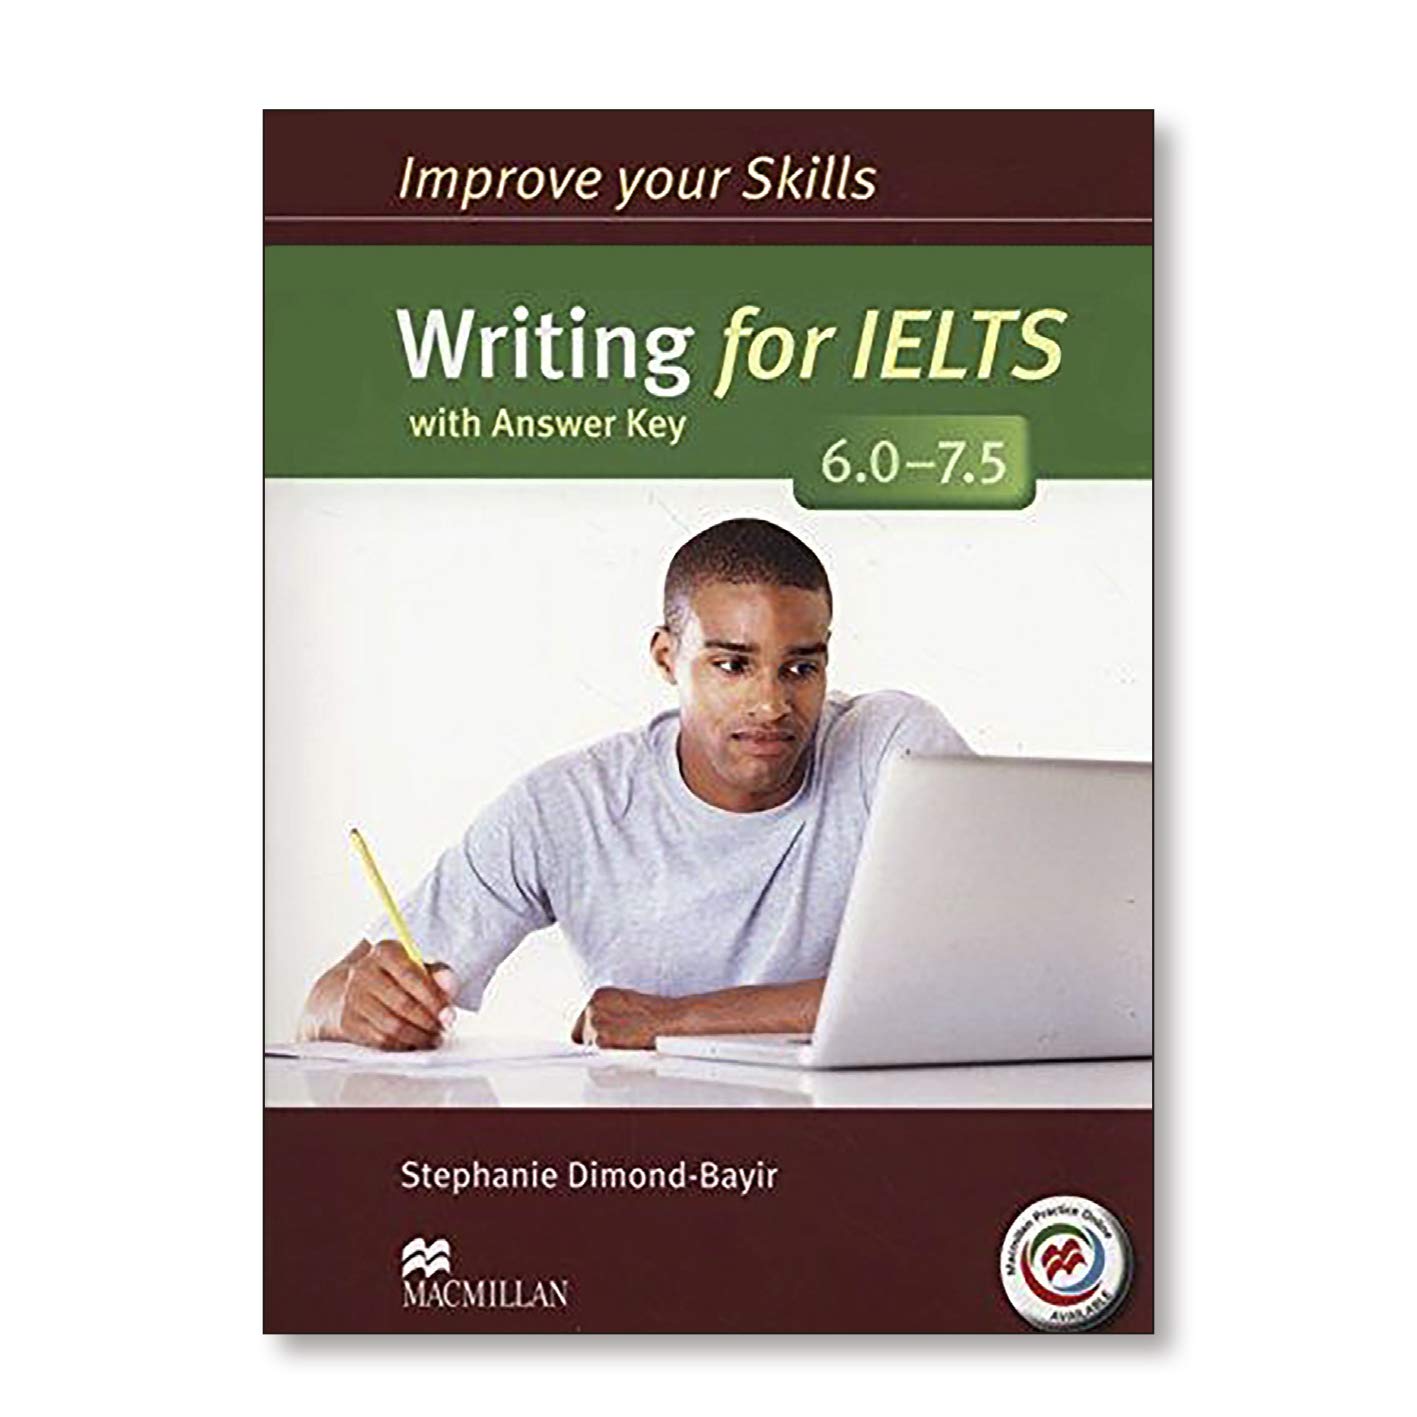 Improve Your Skills - Writing for IELTS 6.0 - 7.5 - Students Book with Key MPO Pack | Stephanie Dimond-Bayir